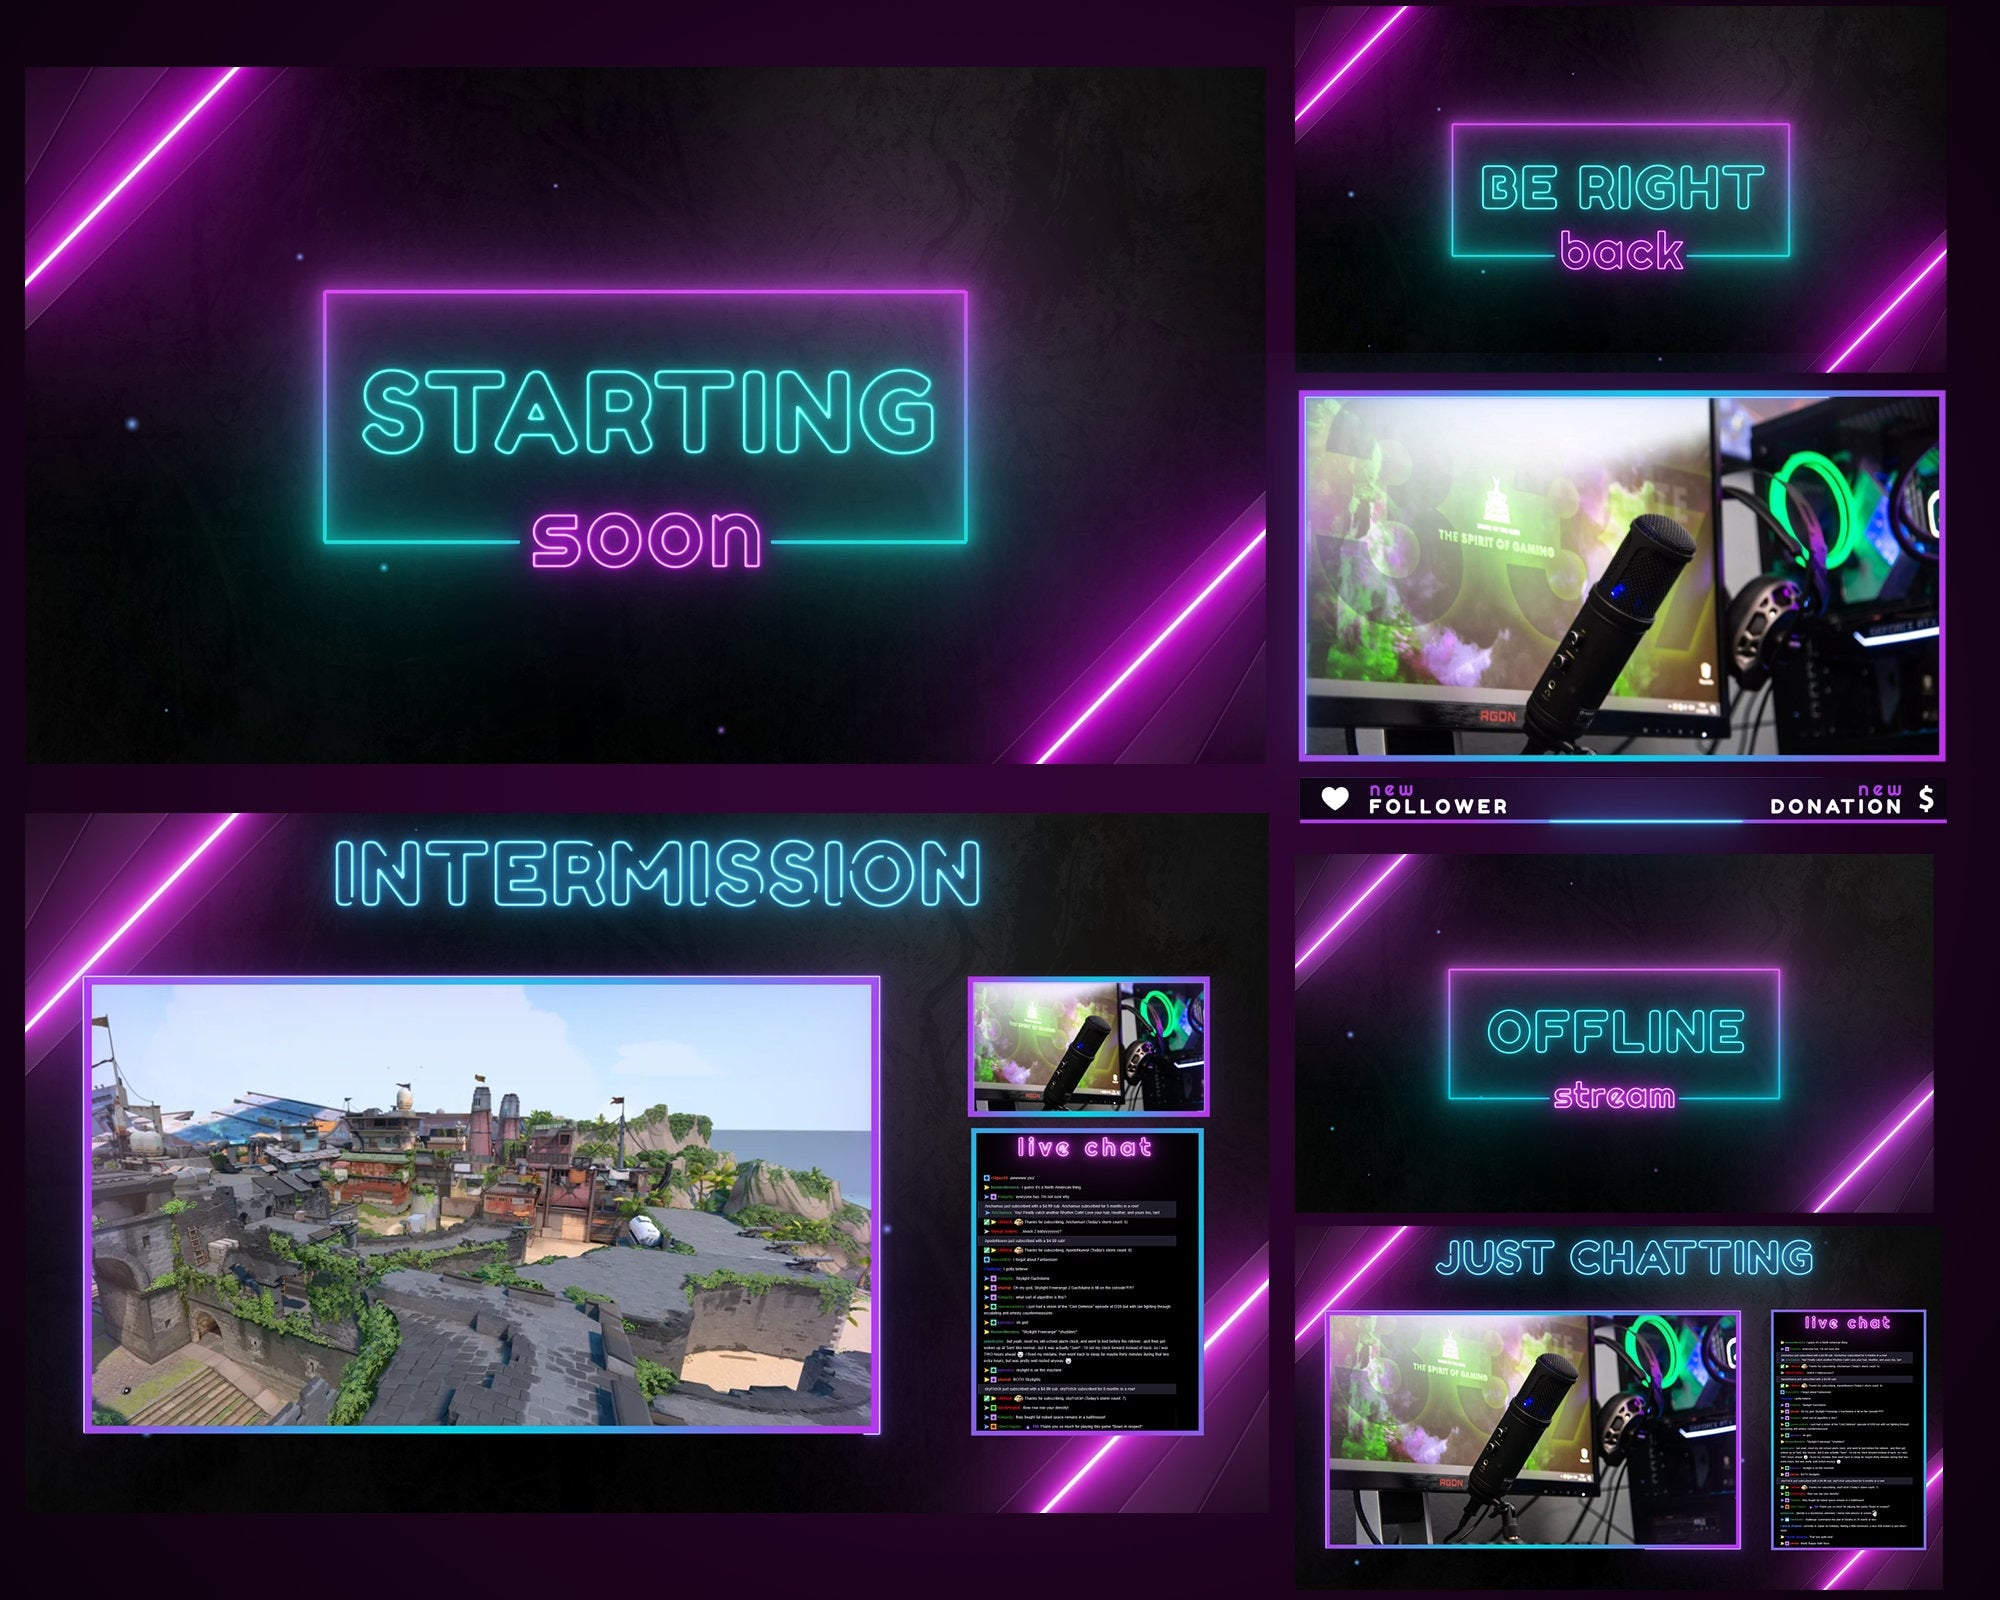 I've been working on a live stream overlay for OBS with Rainbow 6 Siege data.  What would you guys like to see on an overlay like this? Any tips /  feedback welcome! 